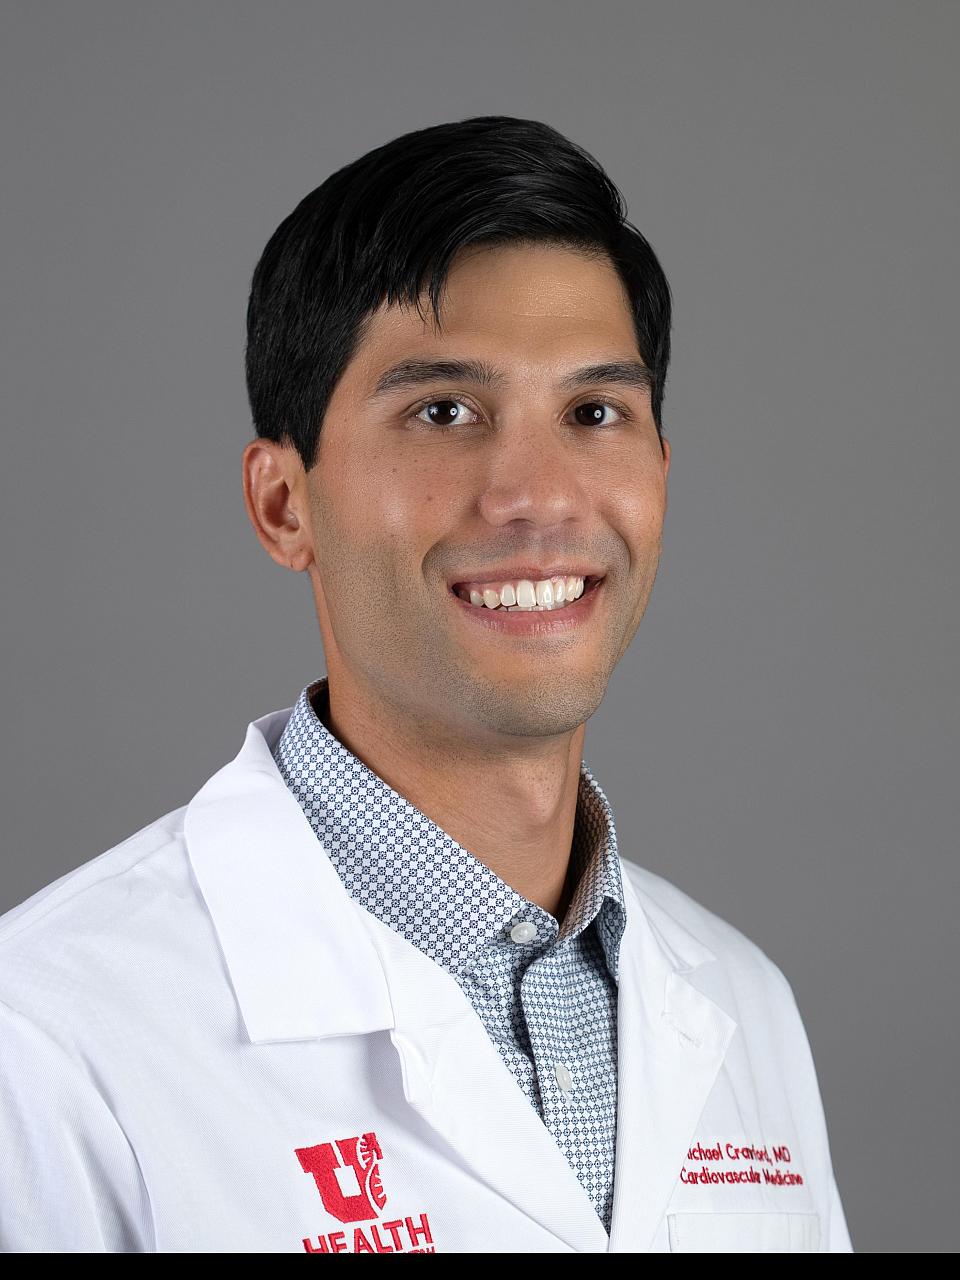 Photo of a man, Dr. Michael Crawford, with short dark hair wearing a checked shirt and white coat smiling at the camera.